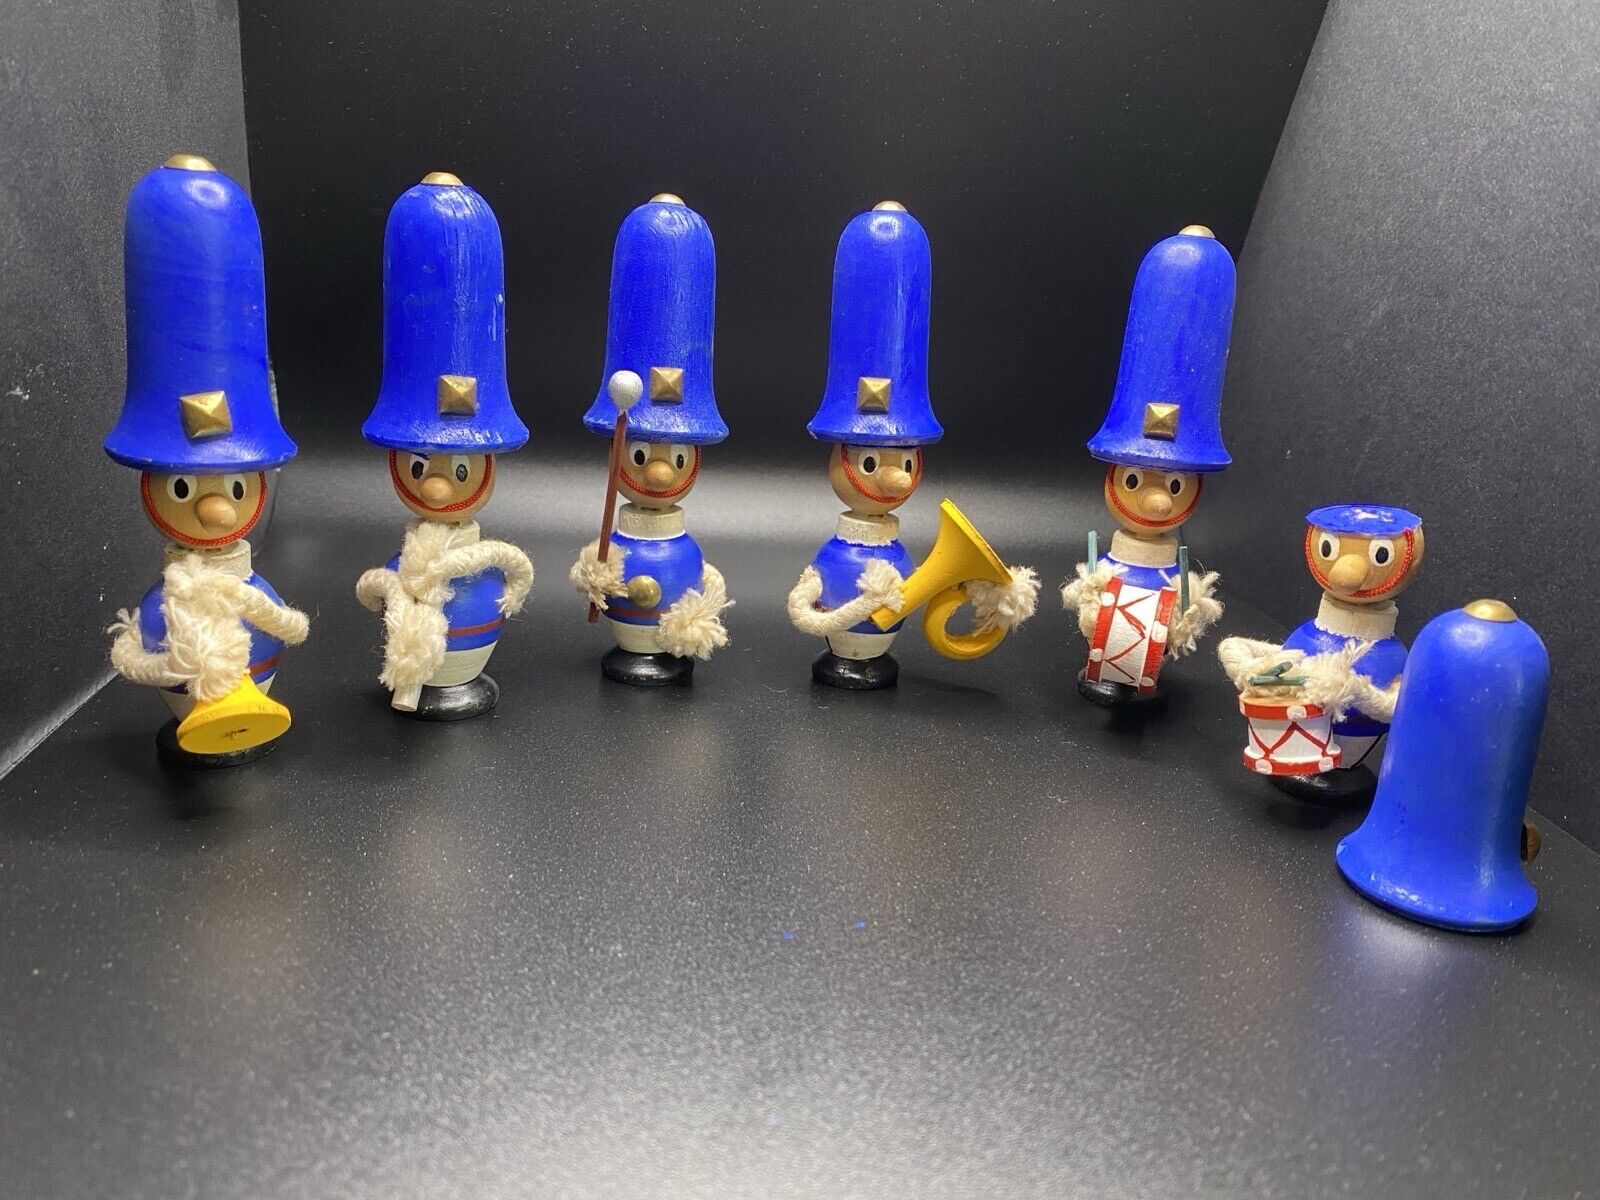 Rare Set Of 6 Queen\'s Guard Blue Hats Vintage Christmas Ornaments Made In Japan